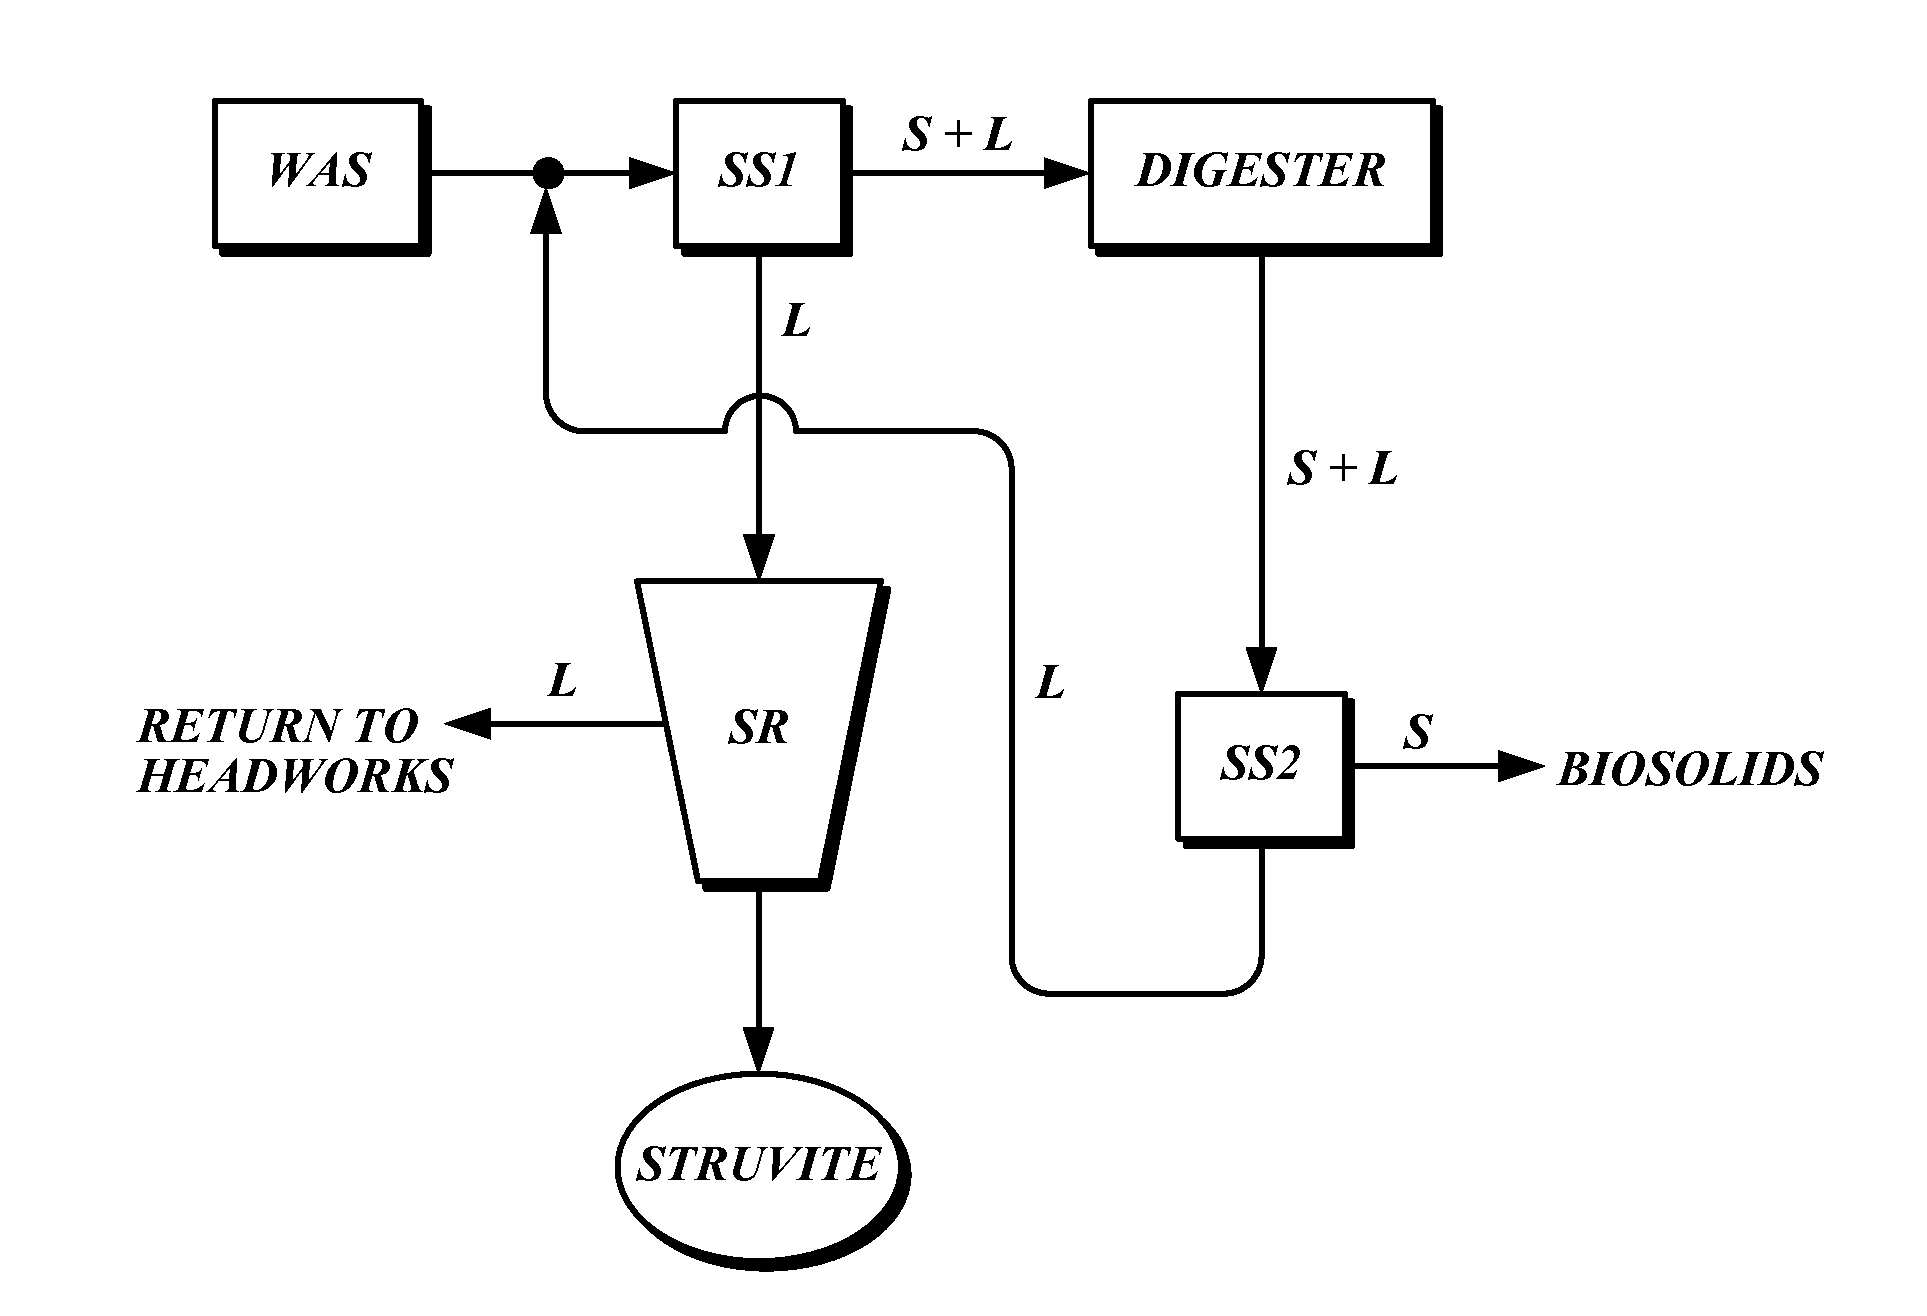 Methods and systems for recovering phosphorus from wastewater including digestate recycle